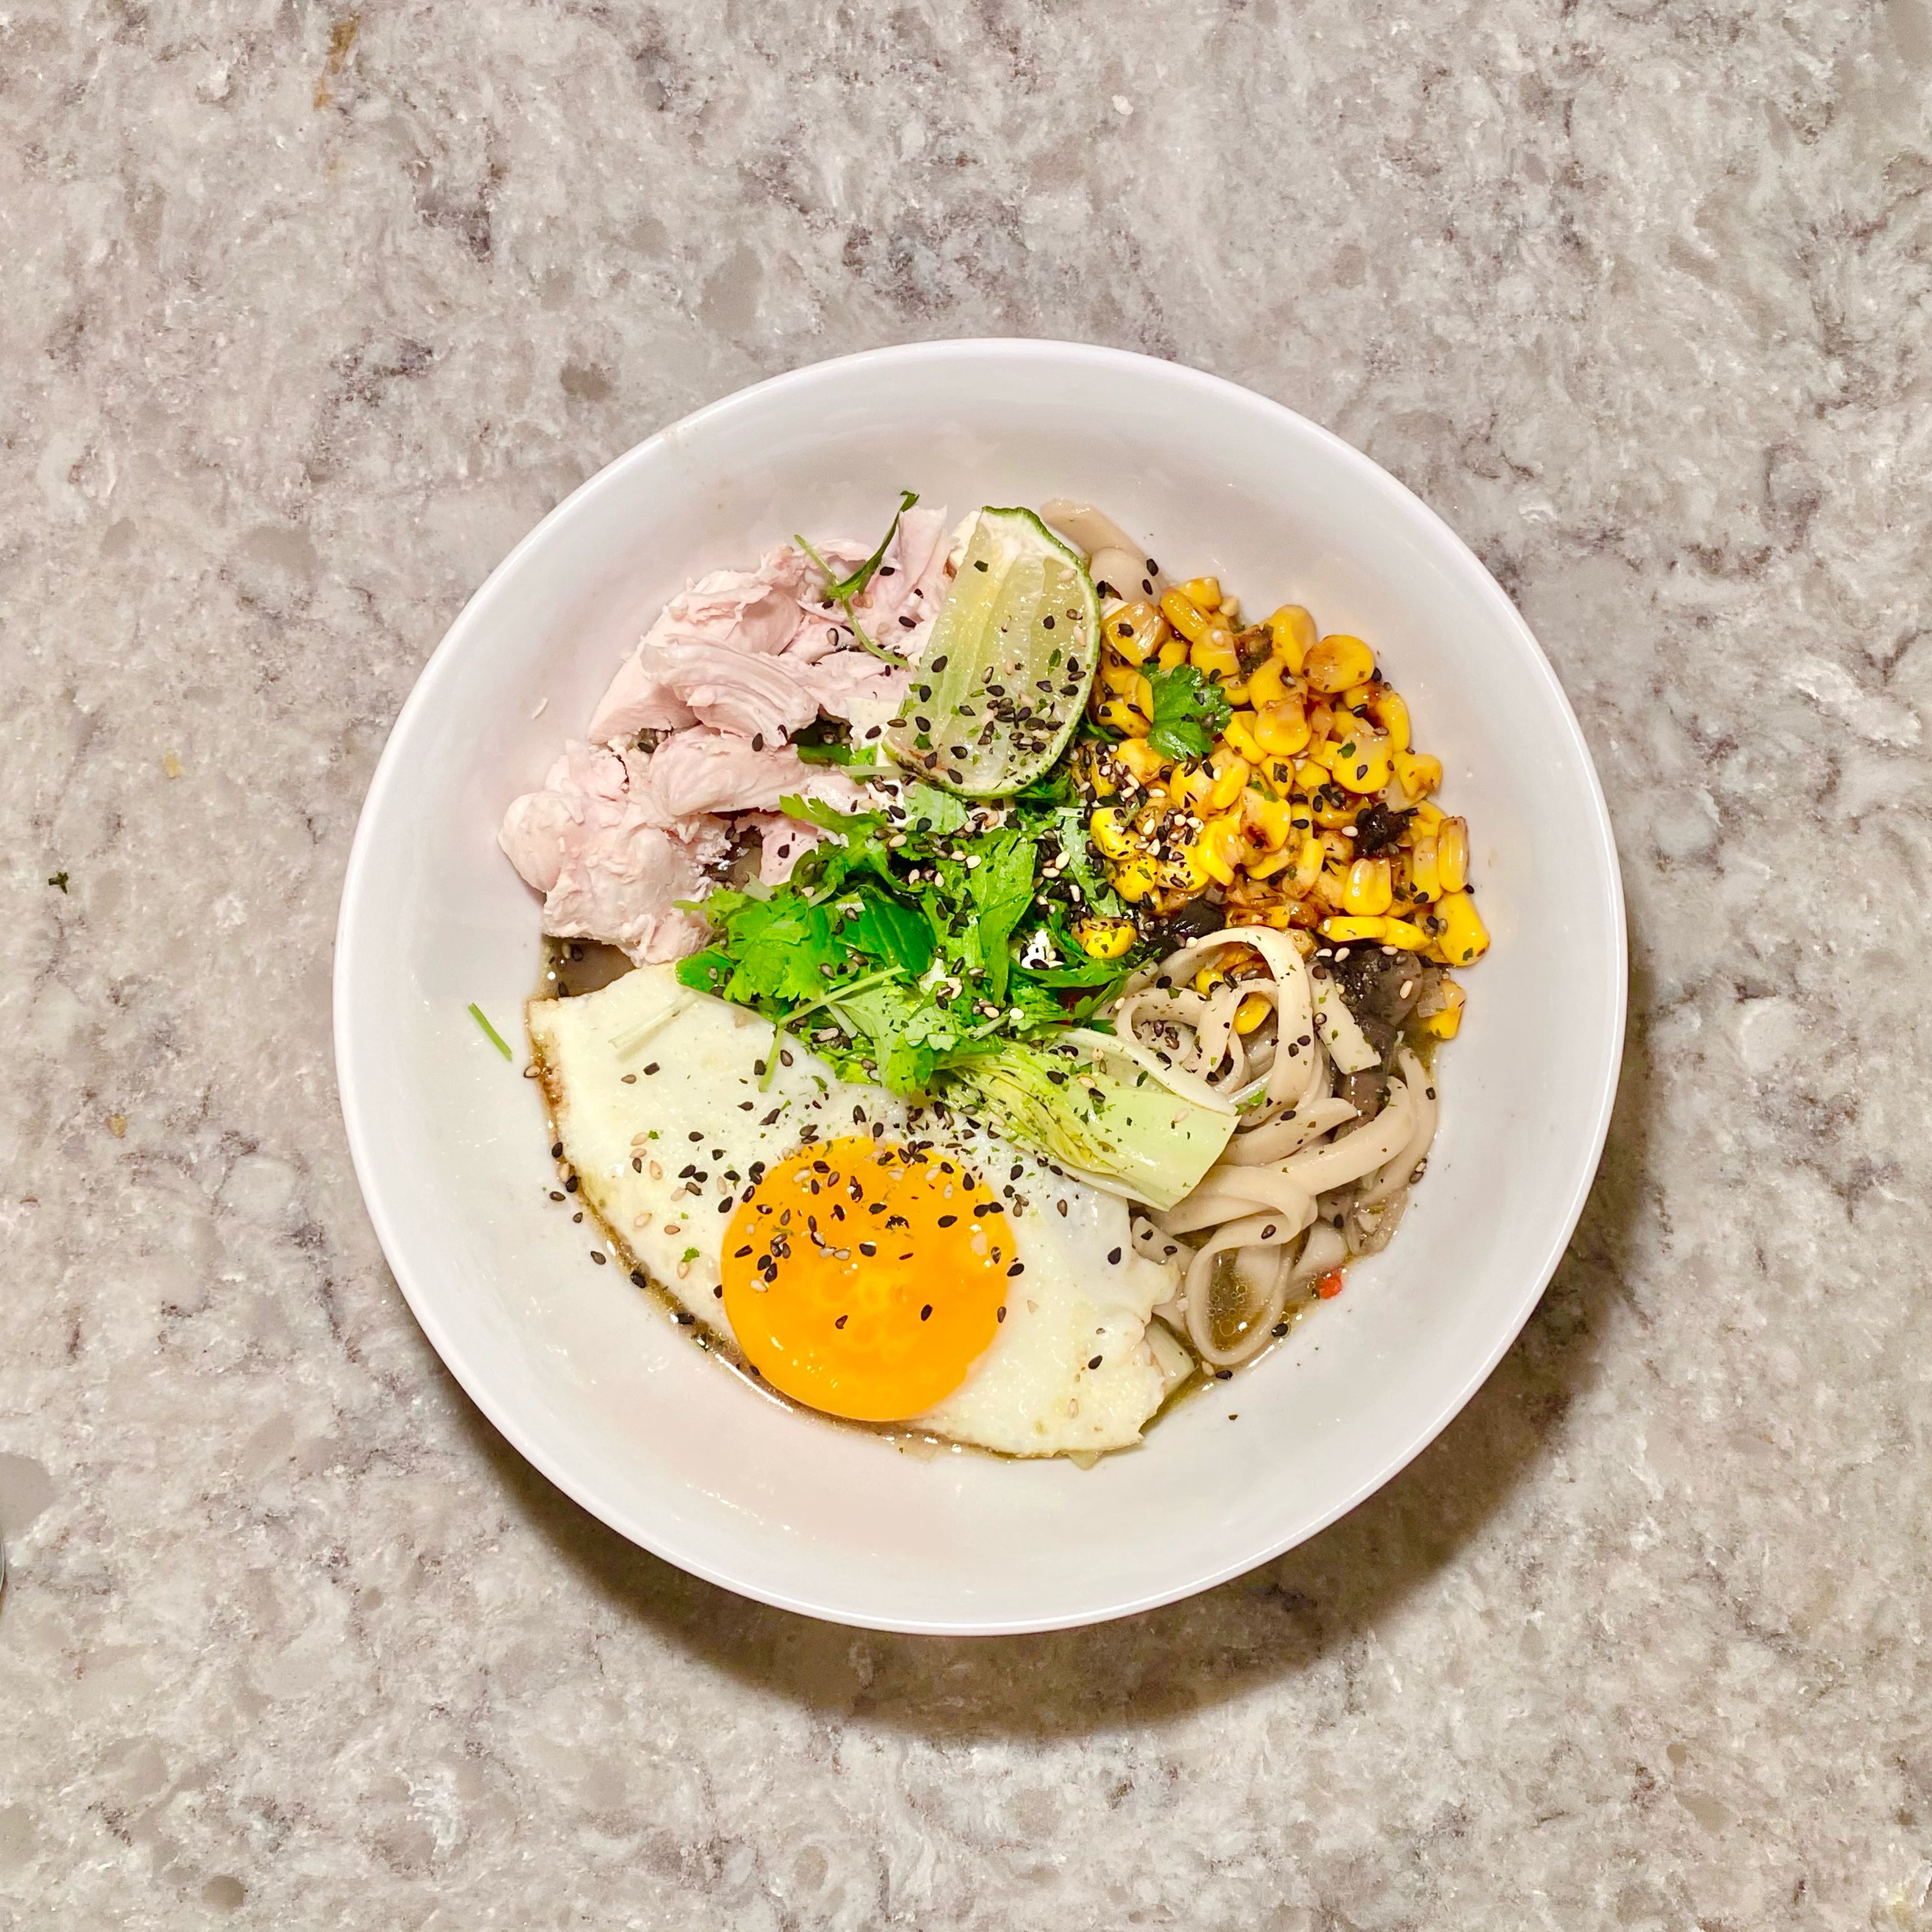 Serve the soup in a deep bowl. Add the corn on top along with chopped fresh cilantro, an poached or fried egg and furikake.